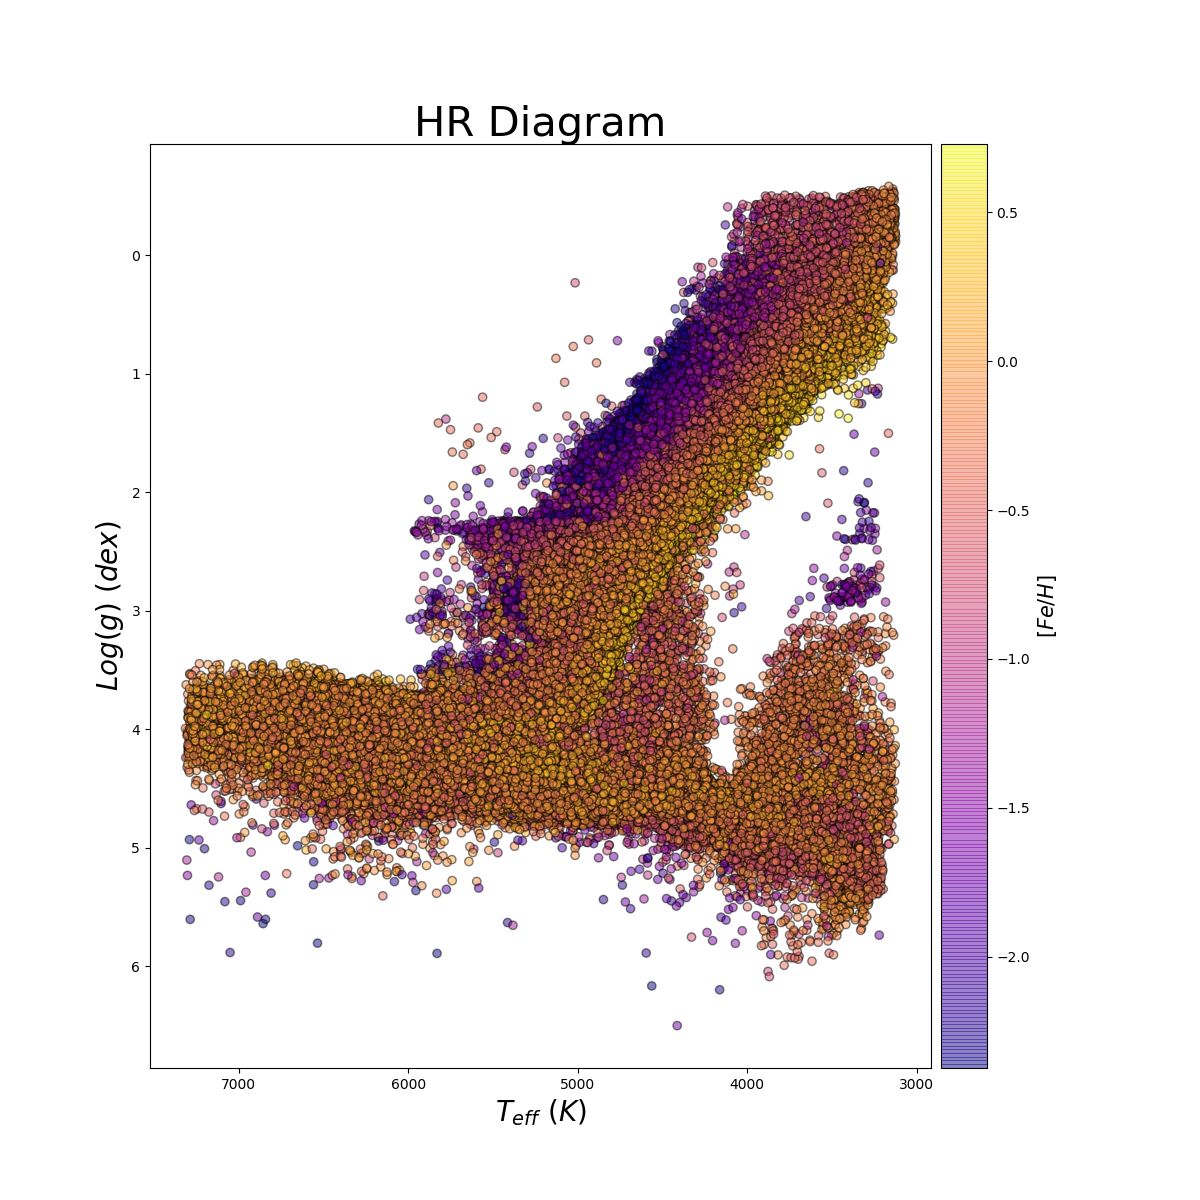 
Plot of the HR Diagram (log$g$ versus T$_{eff}$) for the DR17 sample using the example python code.
<em>Plot by John Donor & Taylor Spoo.</em>
